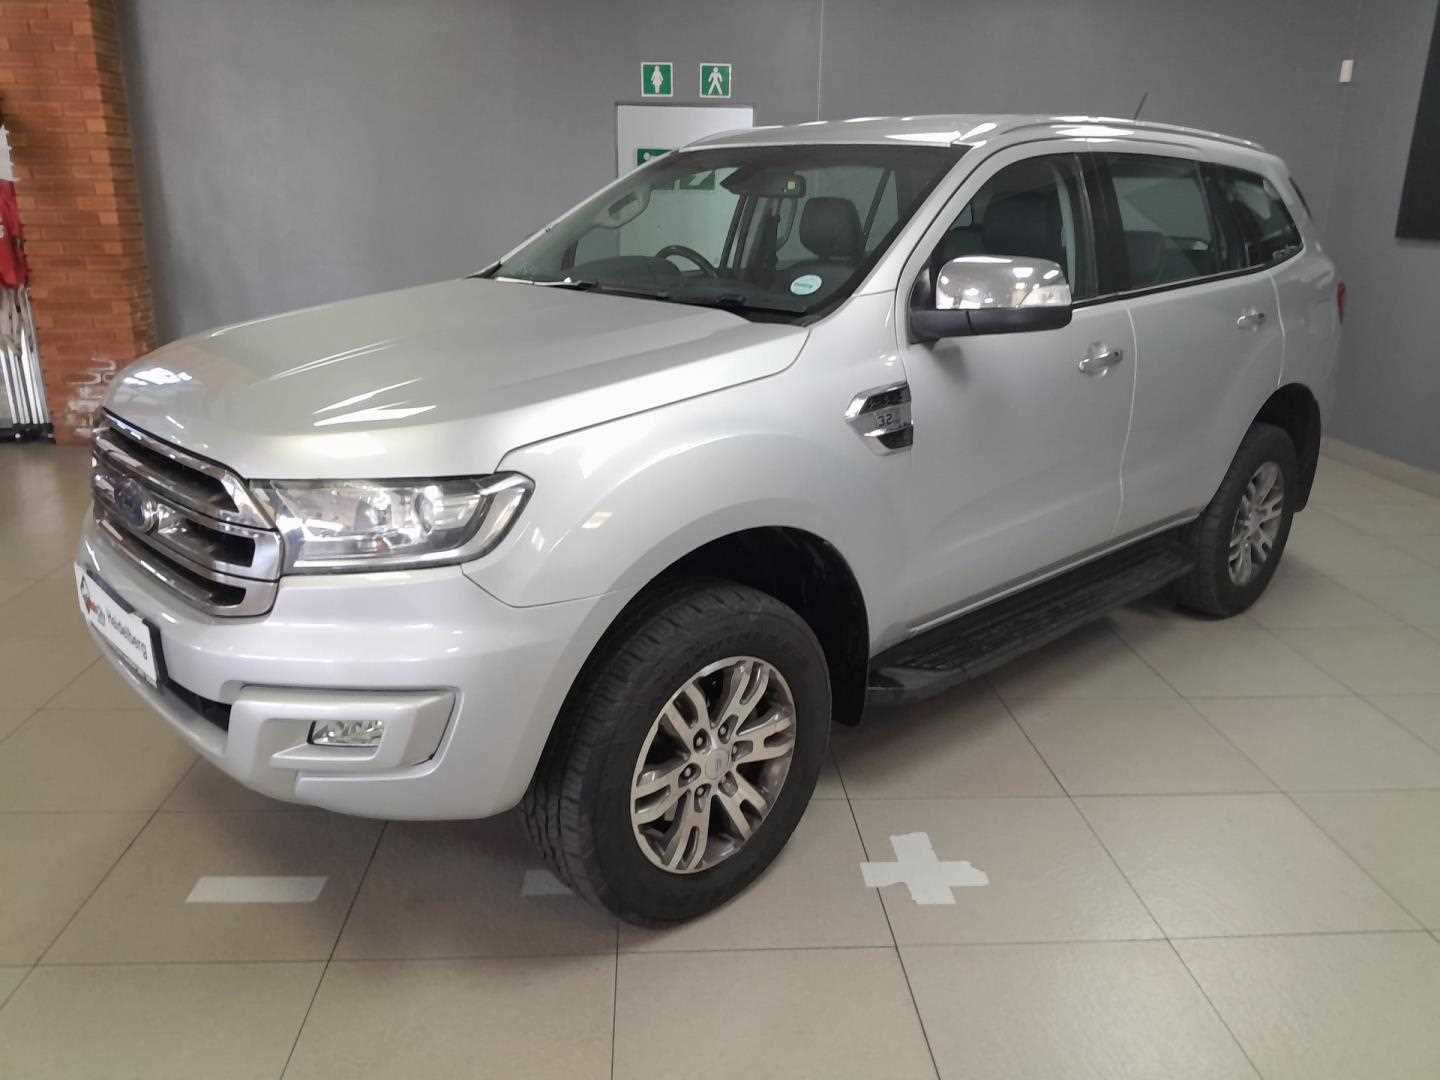 2018 Ford Everest 3.2 Tdci Xlt 4X4 At for sale - 337727